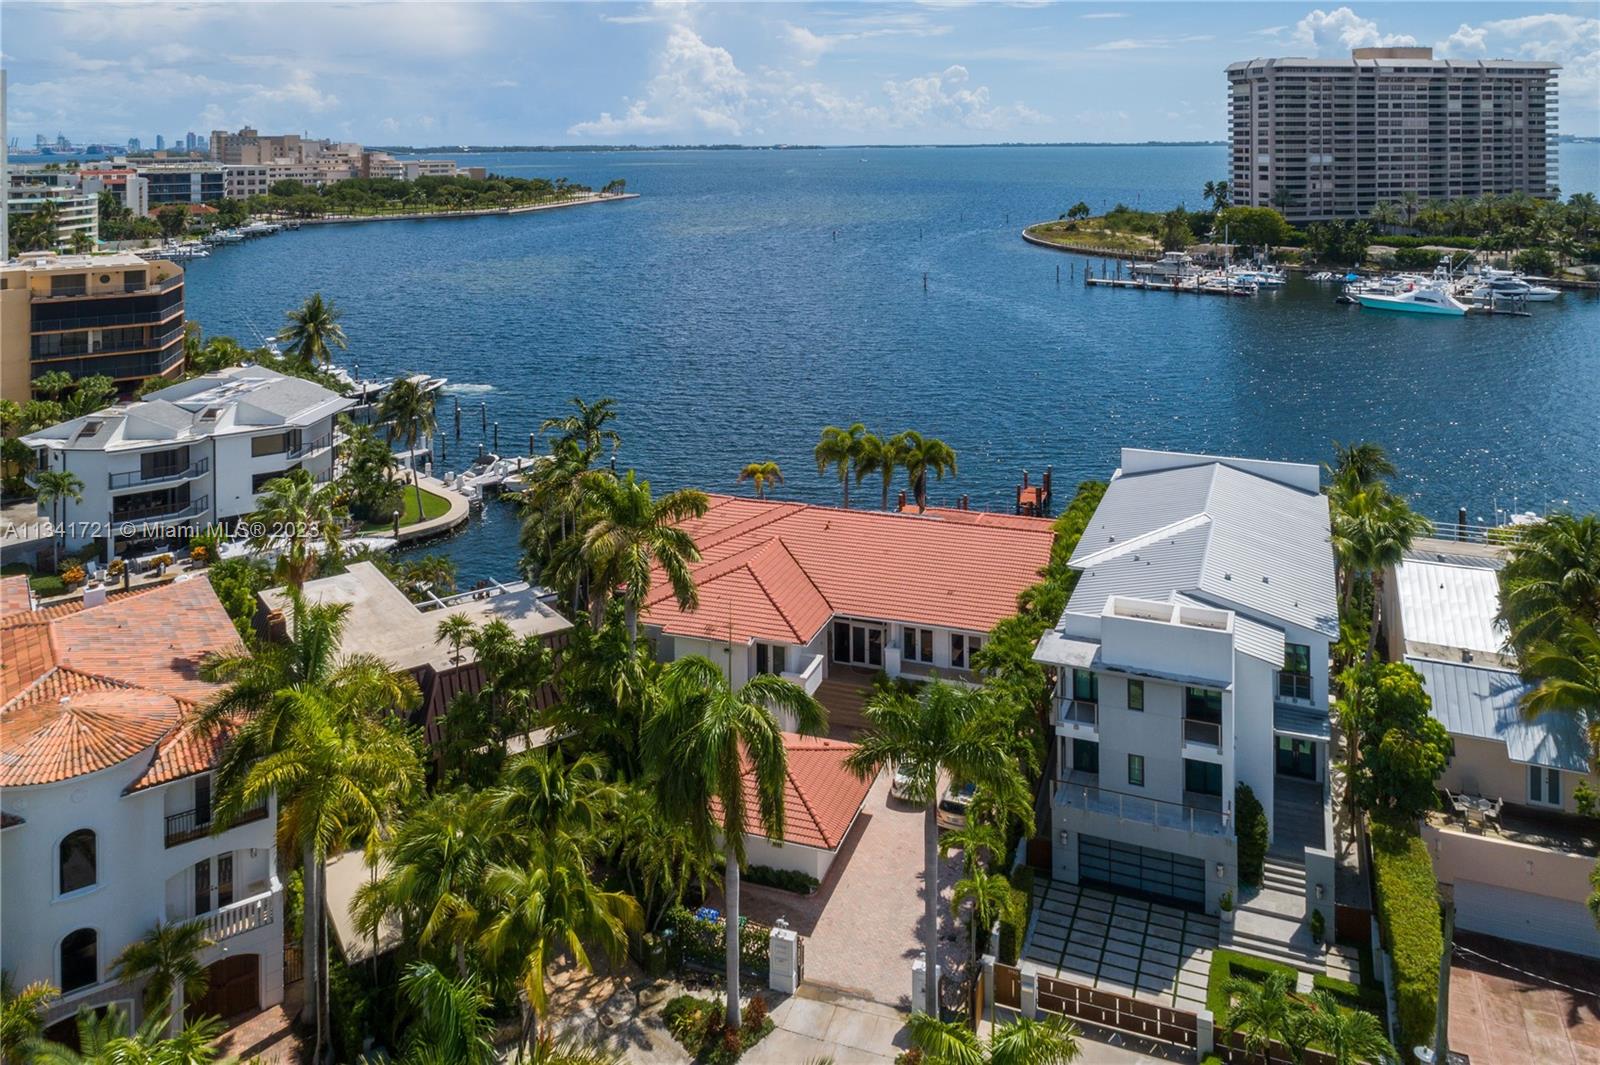 INCREDIBLE OPPORTUNITY TO BUILD YOUR DREAM HOME ON BISCAYNE BAY! BOATER'S PARADISE WITH 150 FEET OF WATERFRONT. WIDE BAY IN THE HEART OF COCONUT GROVE. CORNER LOT WITH DEEP 12'  WATER AND A DEEP WATER CHANNEL. DIRECT OCEAN ACCESS, TWO DOCKS,  DAVITS, TO ACCOMODATE YACHTS, TENDER BOATS, JET SKIS AND MORE. MOMENTS TO THE BEST YACHT CLUBS, MARINAS, MILES OF WATERFRONT PARKS, WORLD CLASS DINING, SHOPPING AND SOME OF THE BEST SCHOOLS IN THE COUNTY.